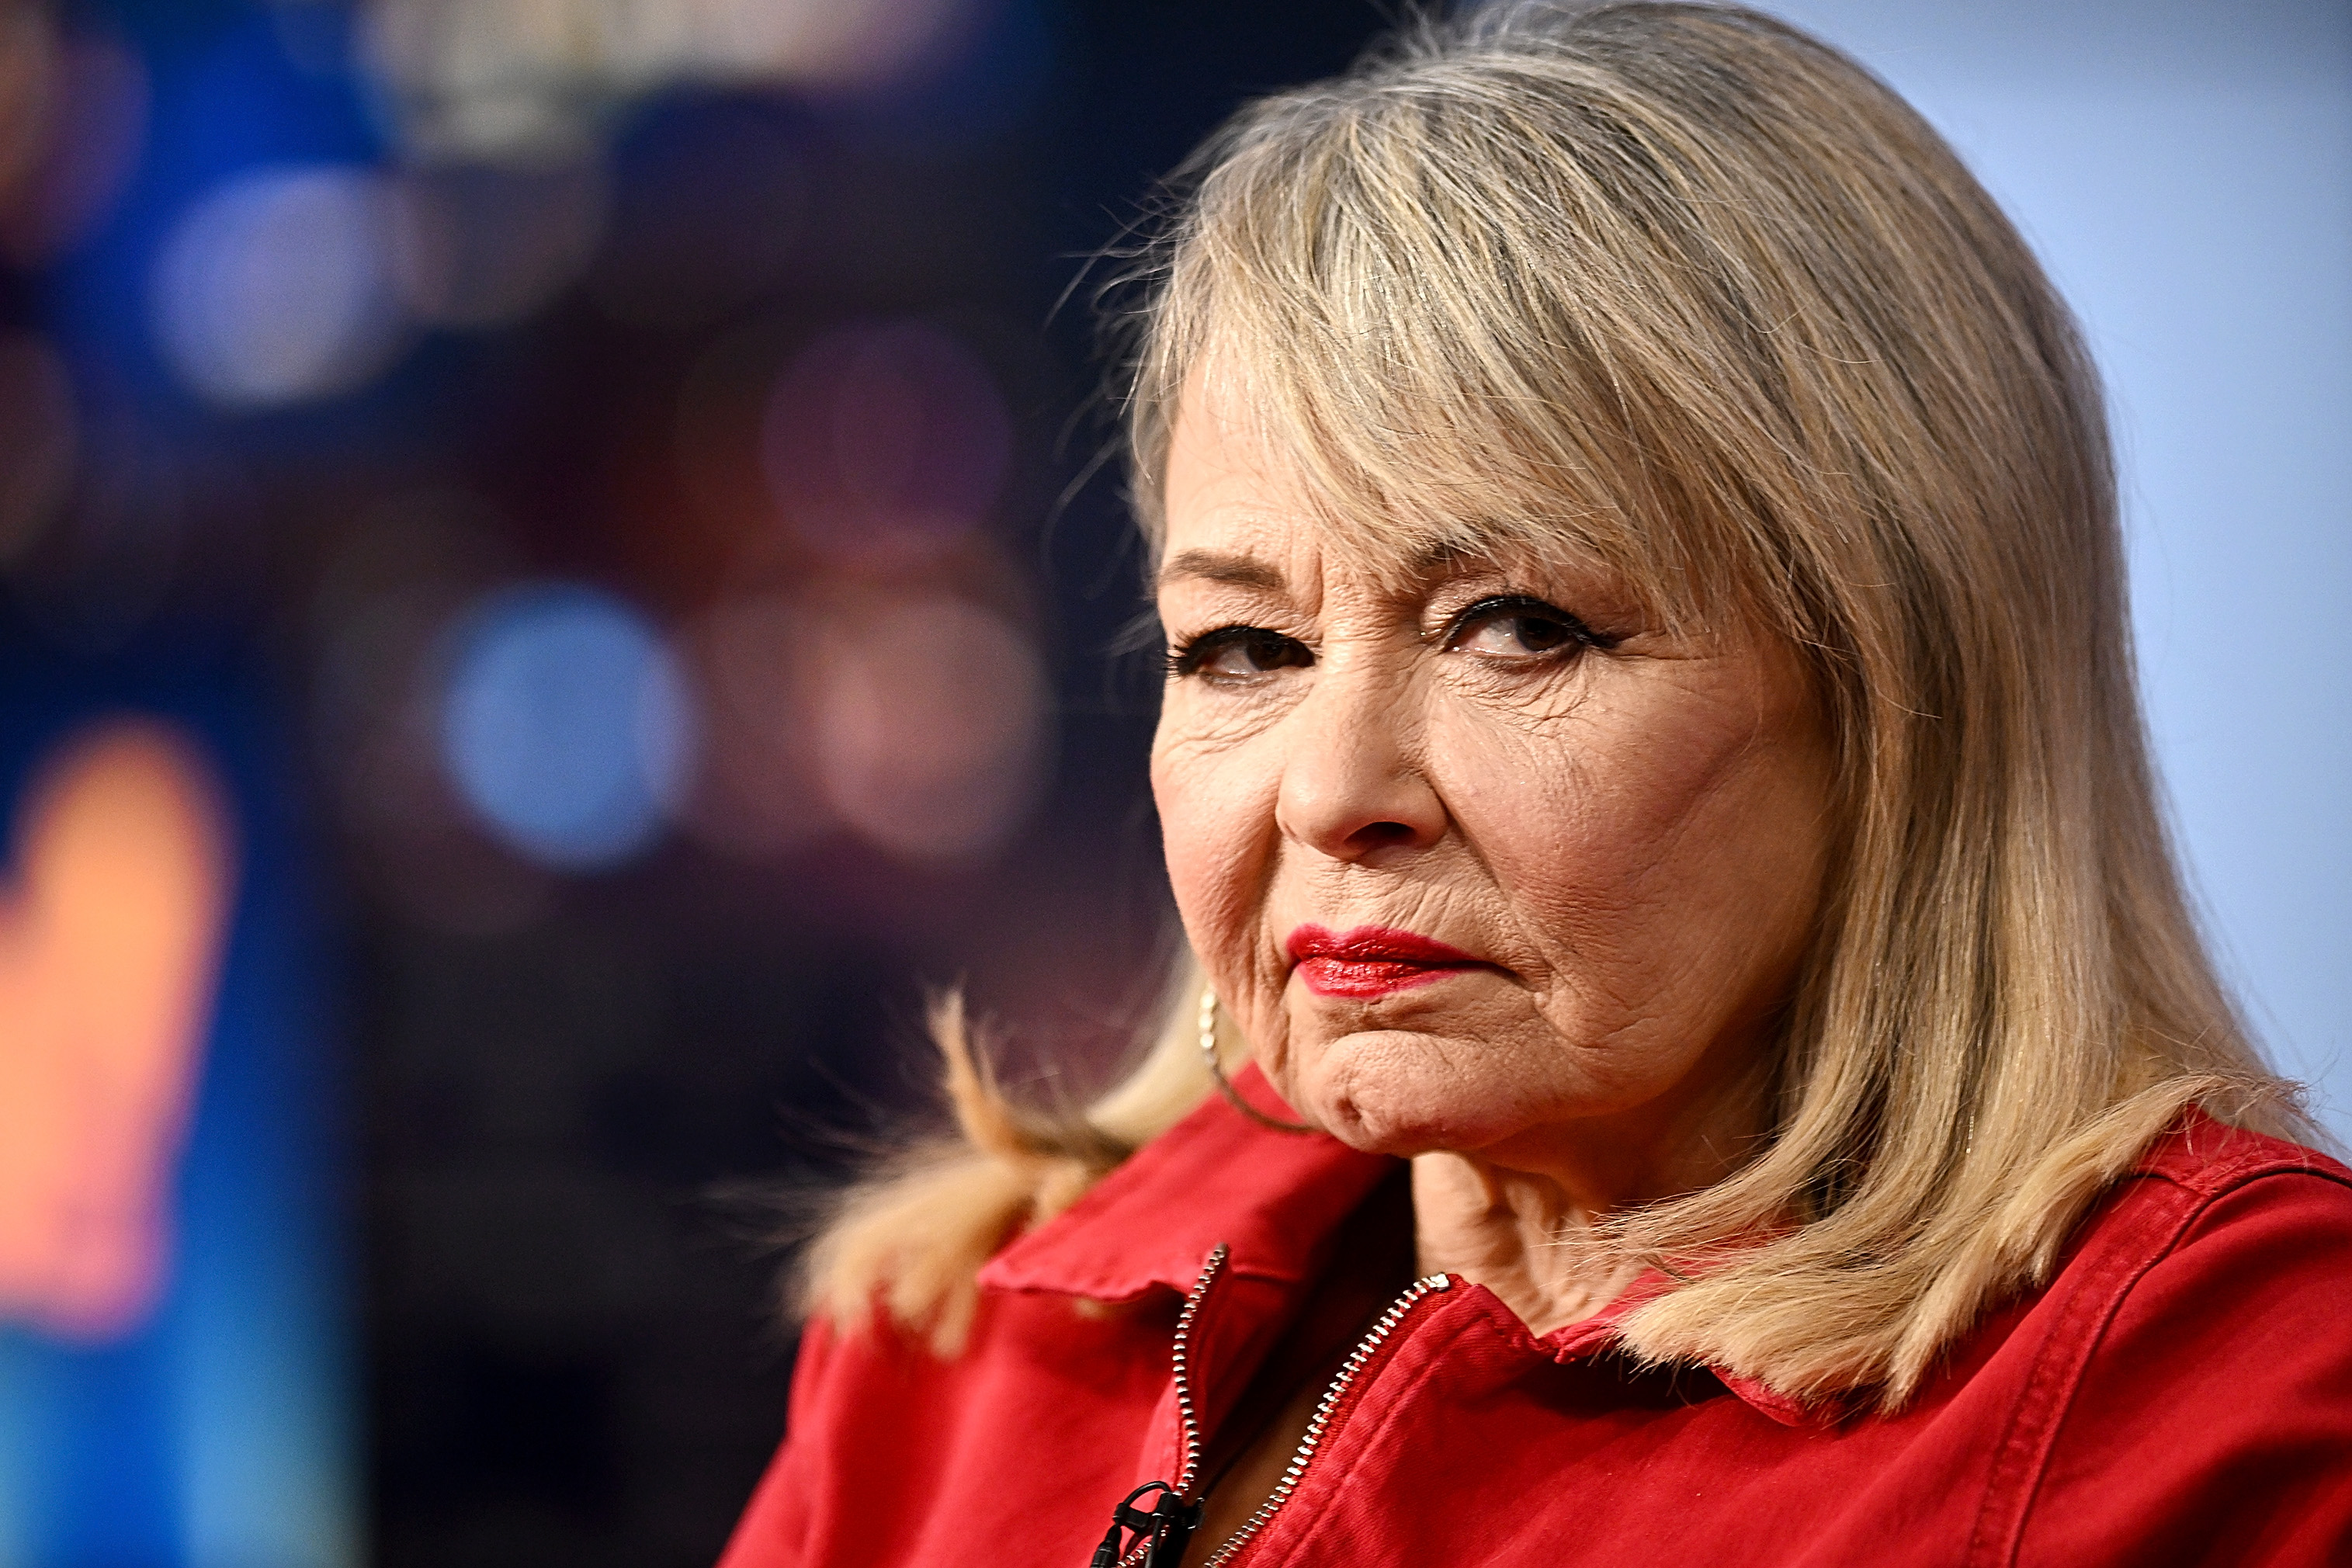 Roseanne Barr at FOX News Channel’s "Gutfeld!" on February 14, 2023 in New York City | Source: Getty Images